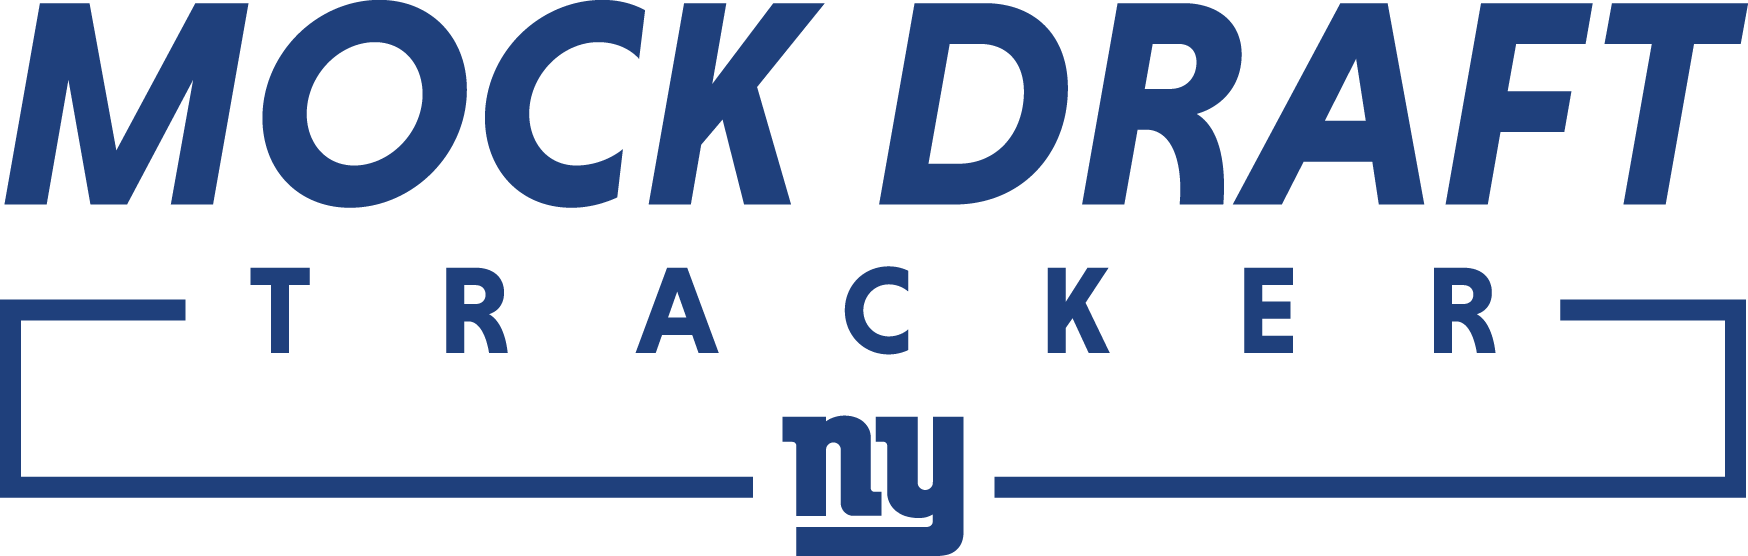 NFL Mock Draft 2.0: Giants, Jets add in trenches, skill positions